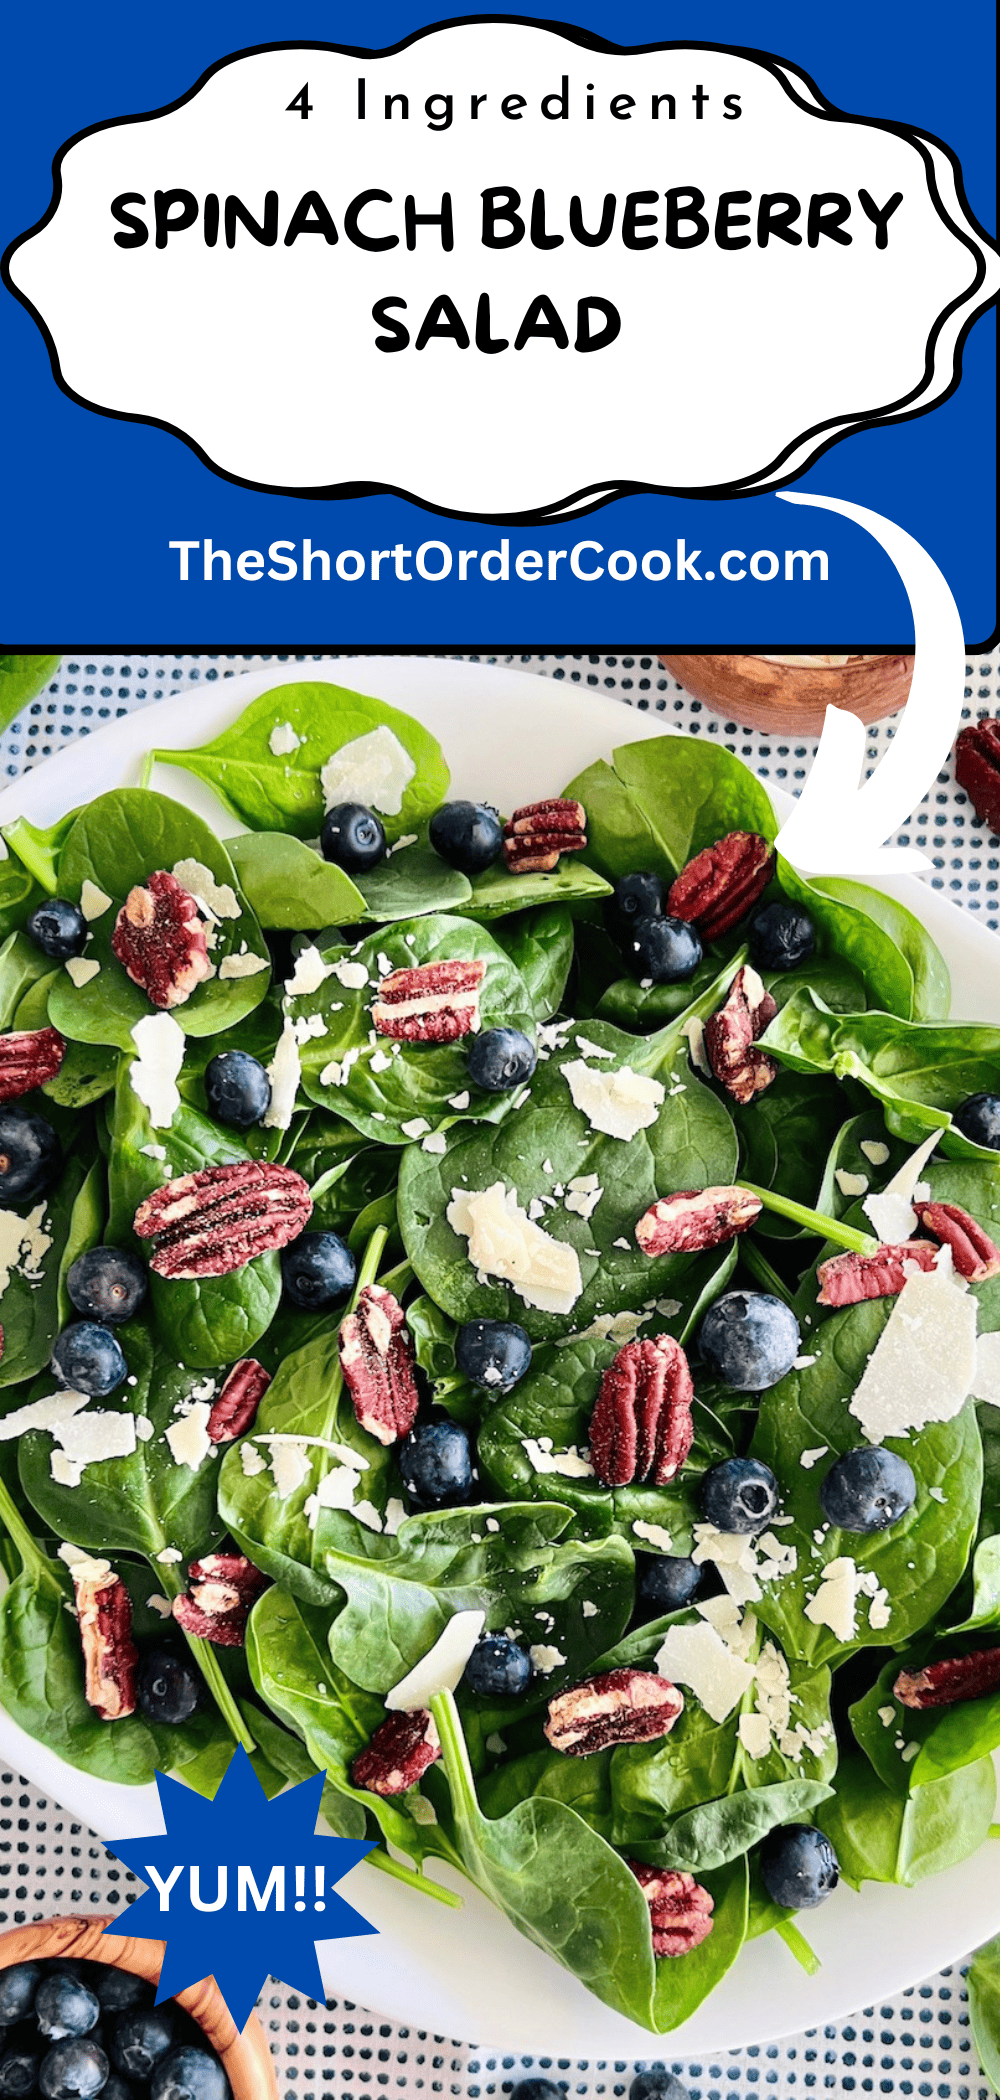 Fresh spinach topped with berries, nuts, & cheese for a simple salad.